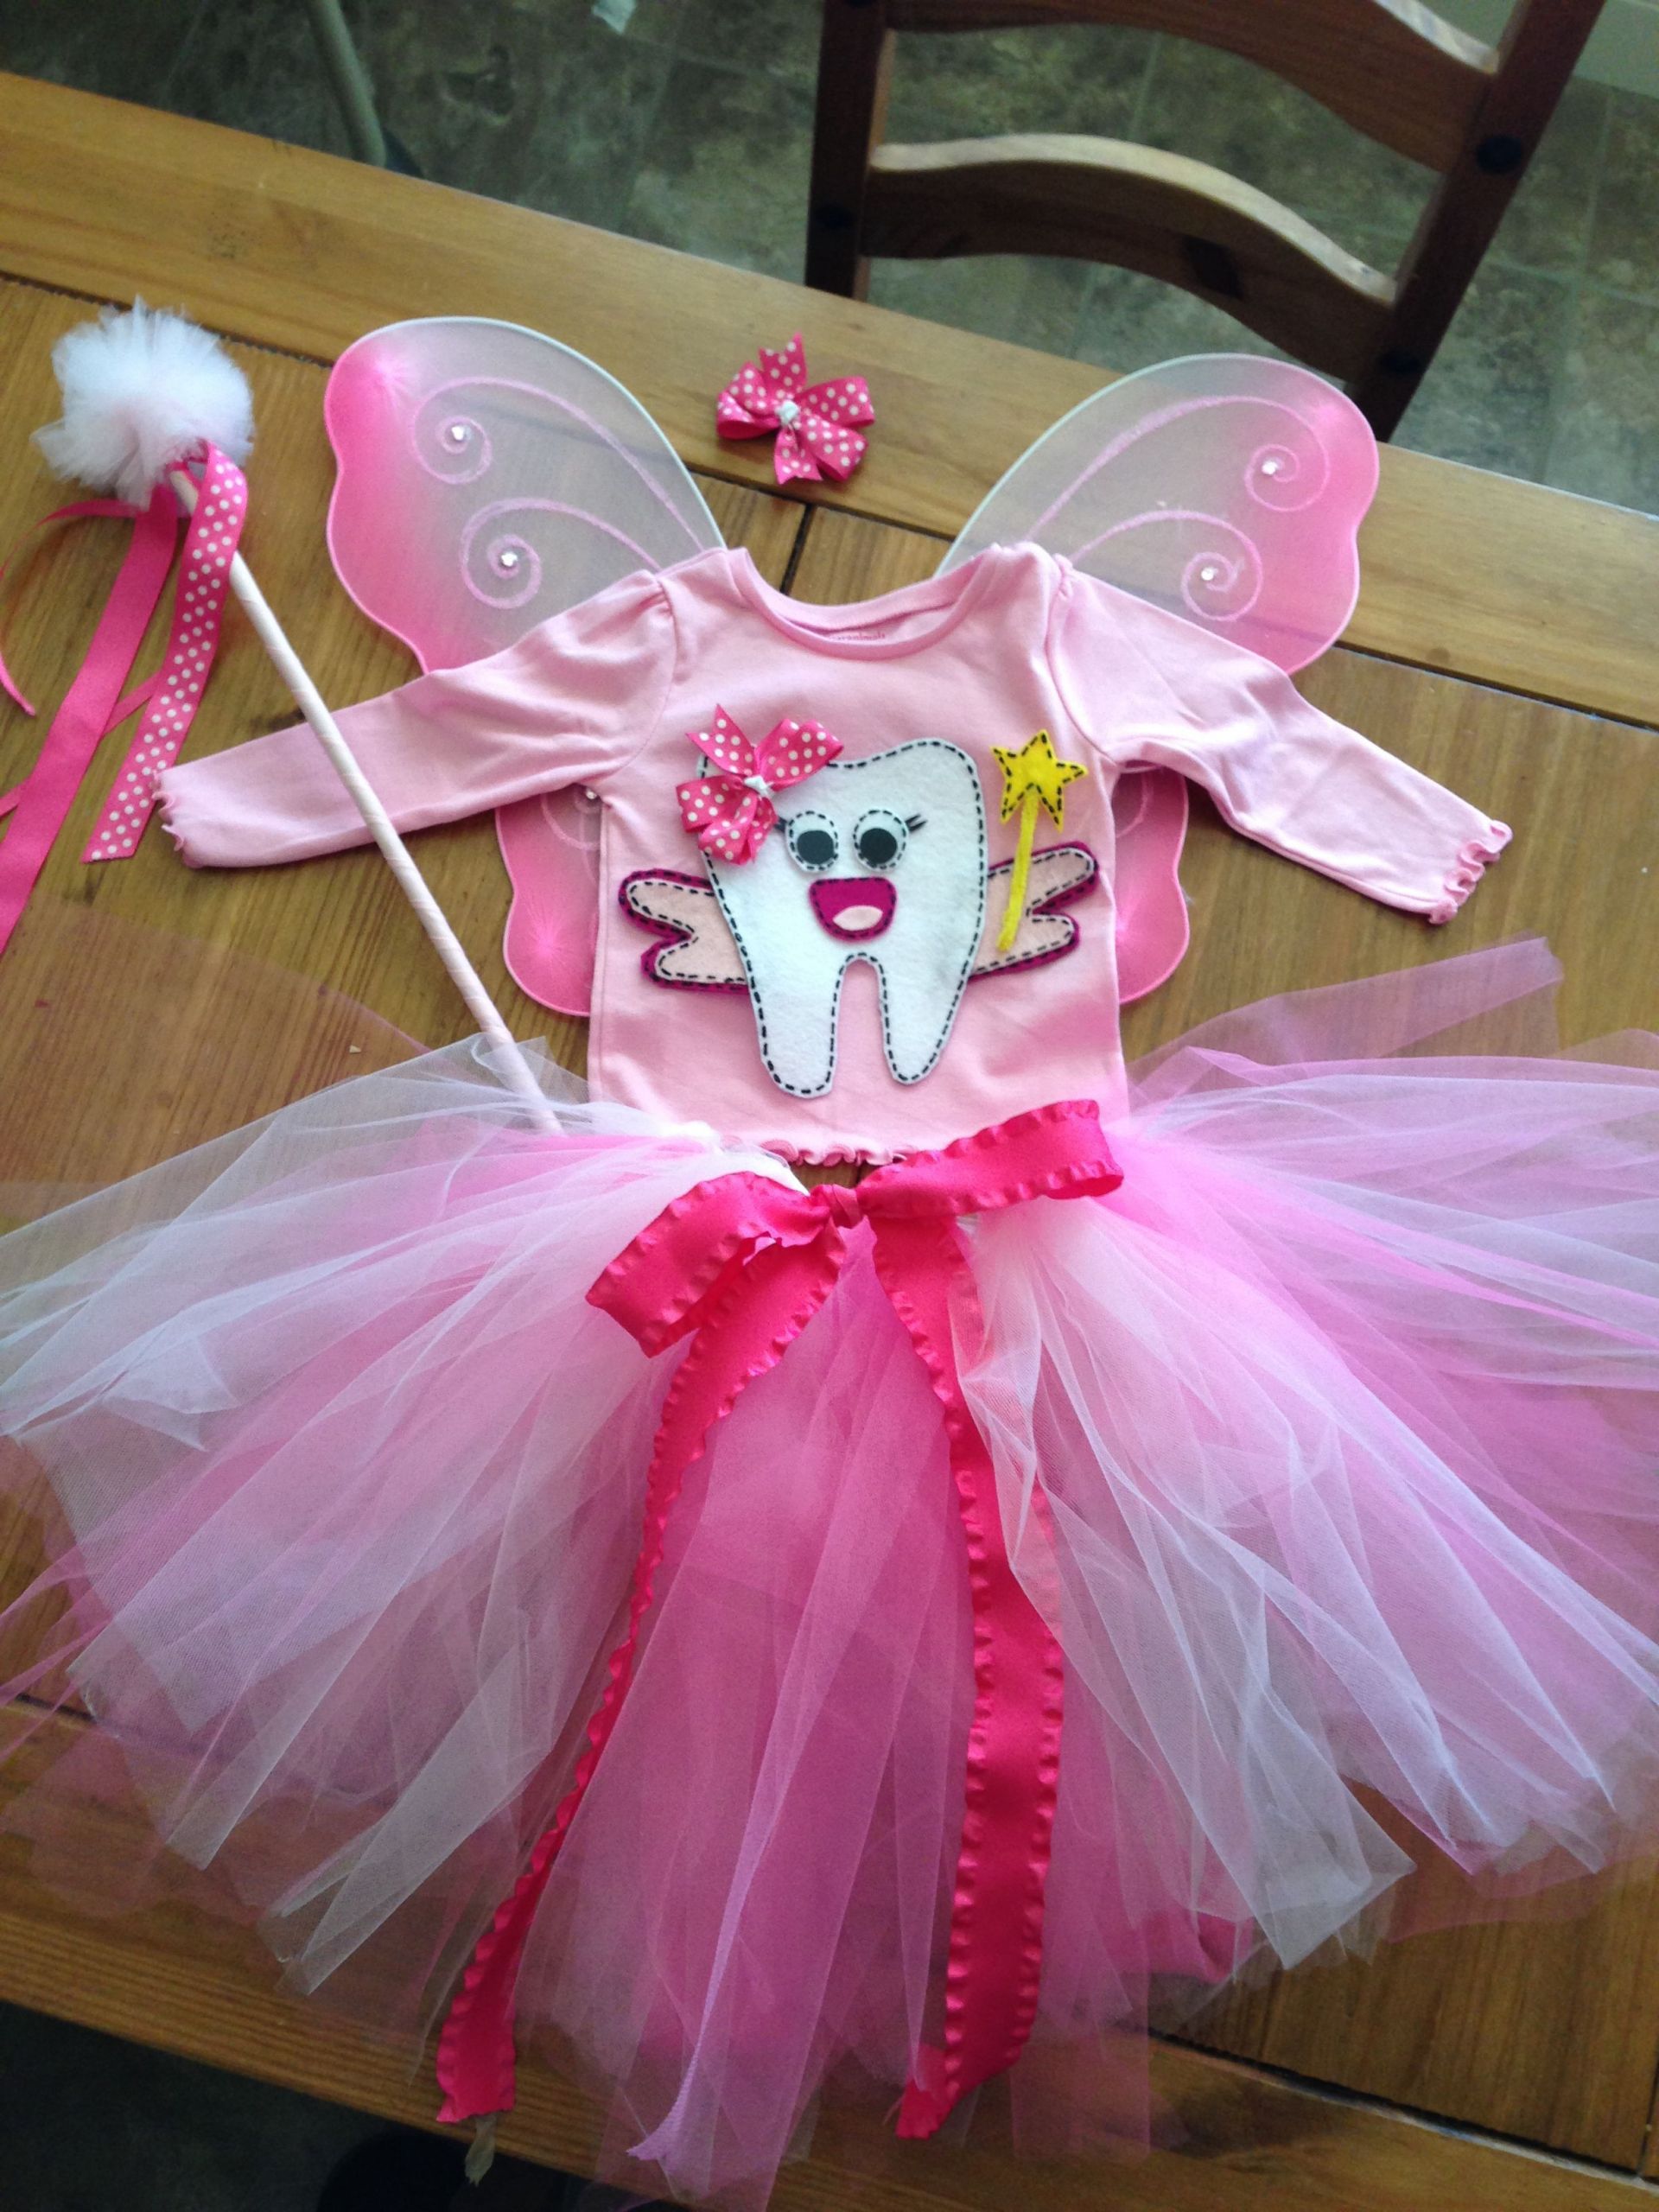 DIY Tooth Fairy Costume
 Afton s tooth fairy costume